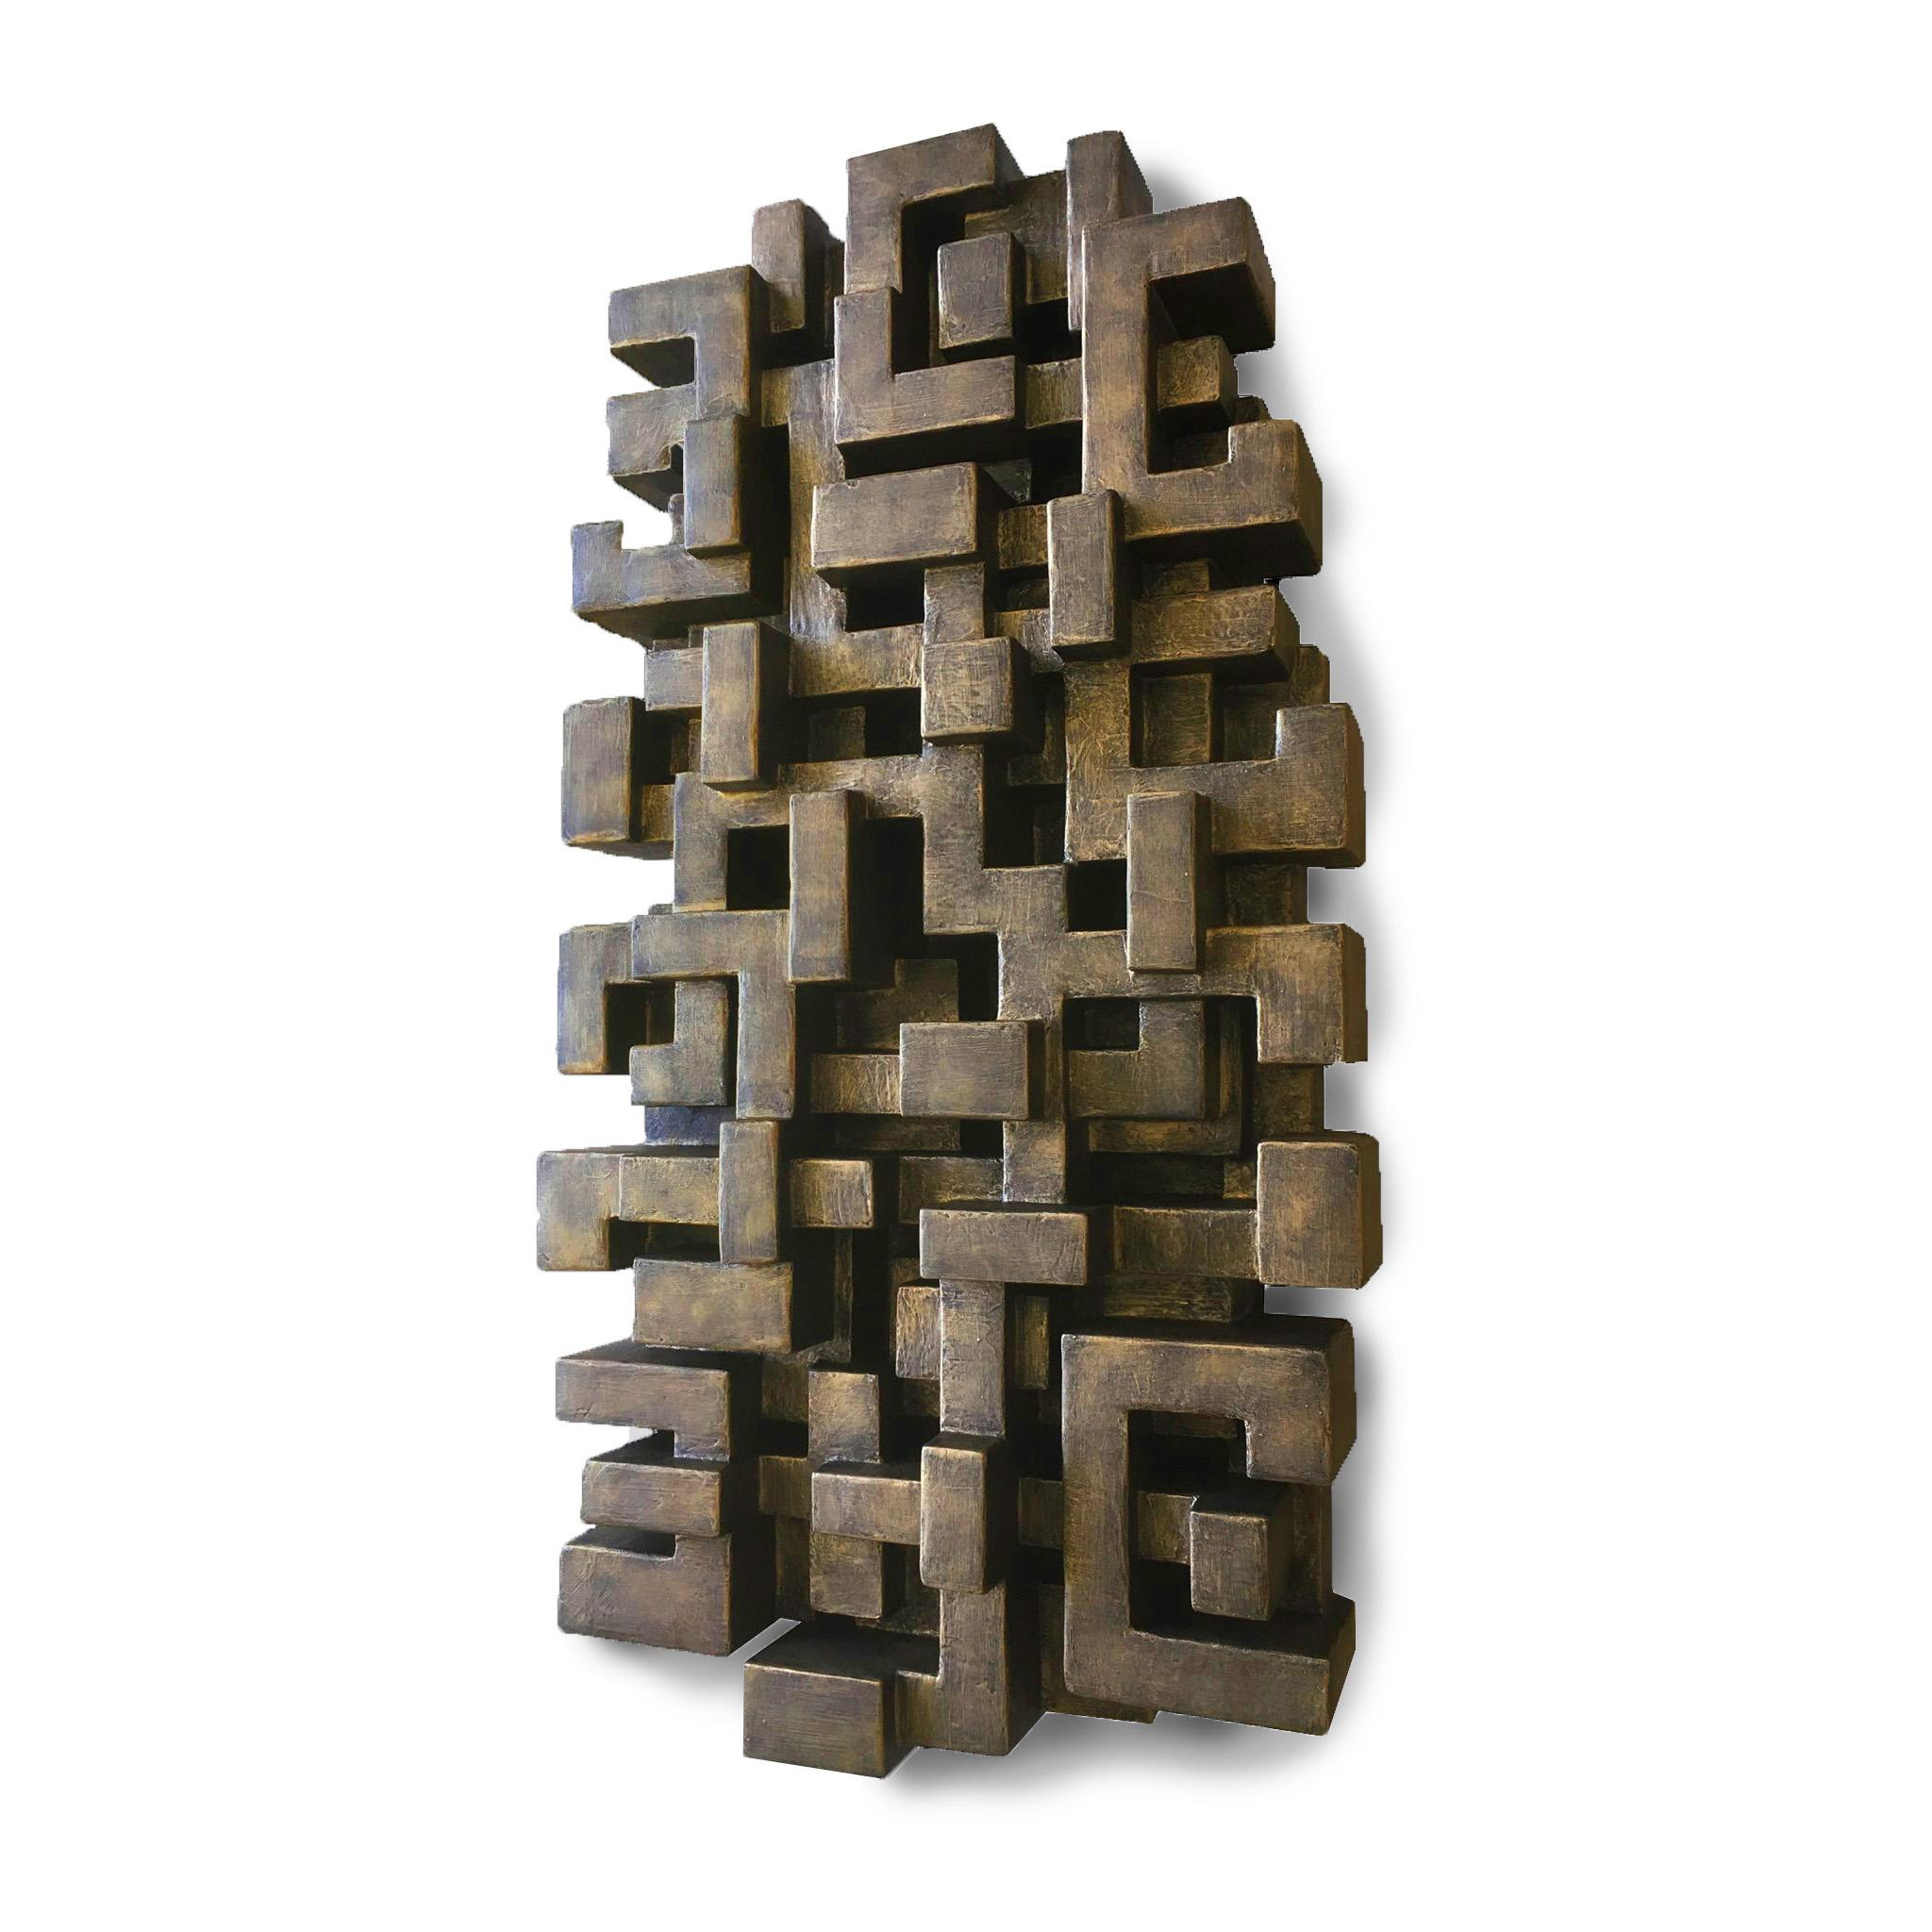 Shibuya wall sculpture by Daniel Schneiger
Dimensions: D 71 x W 137 x H 18 cm
Materials: wood, foam, resin and paint
Custom sizes available. Custom finishes available. Please contact us.

Dan Schneiger
As an architect and artist, I’ve always